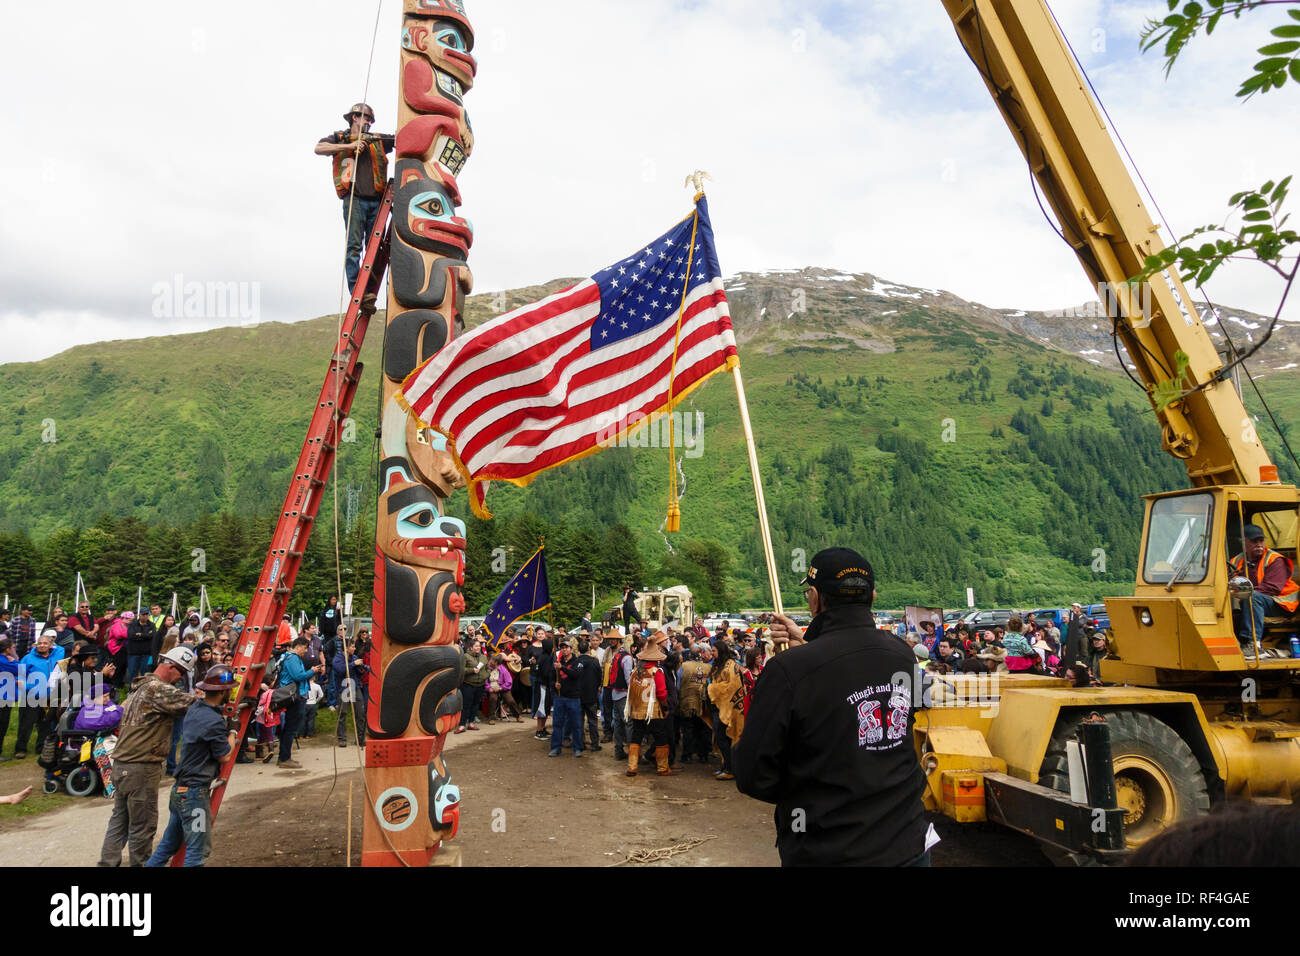 A crowd of people from the Tlingit, Tsimshian and Haida tribes gathered for a traditional Native American Indian totem pole raising, Juneau, Alaska Stock Photo